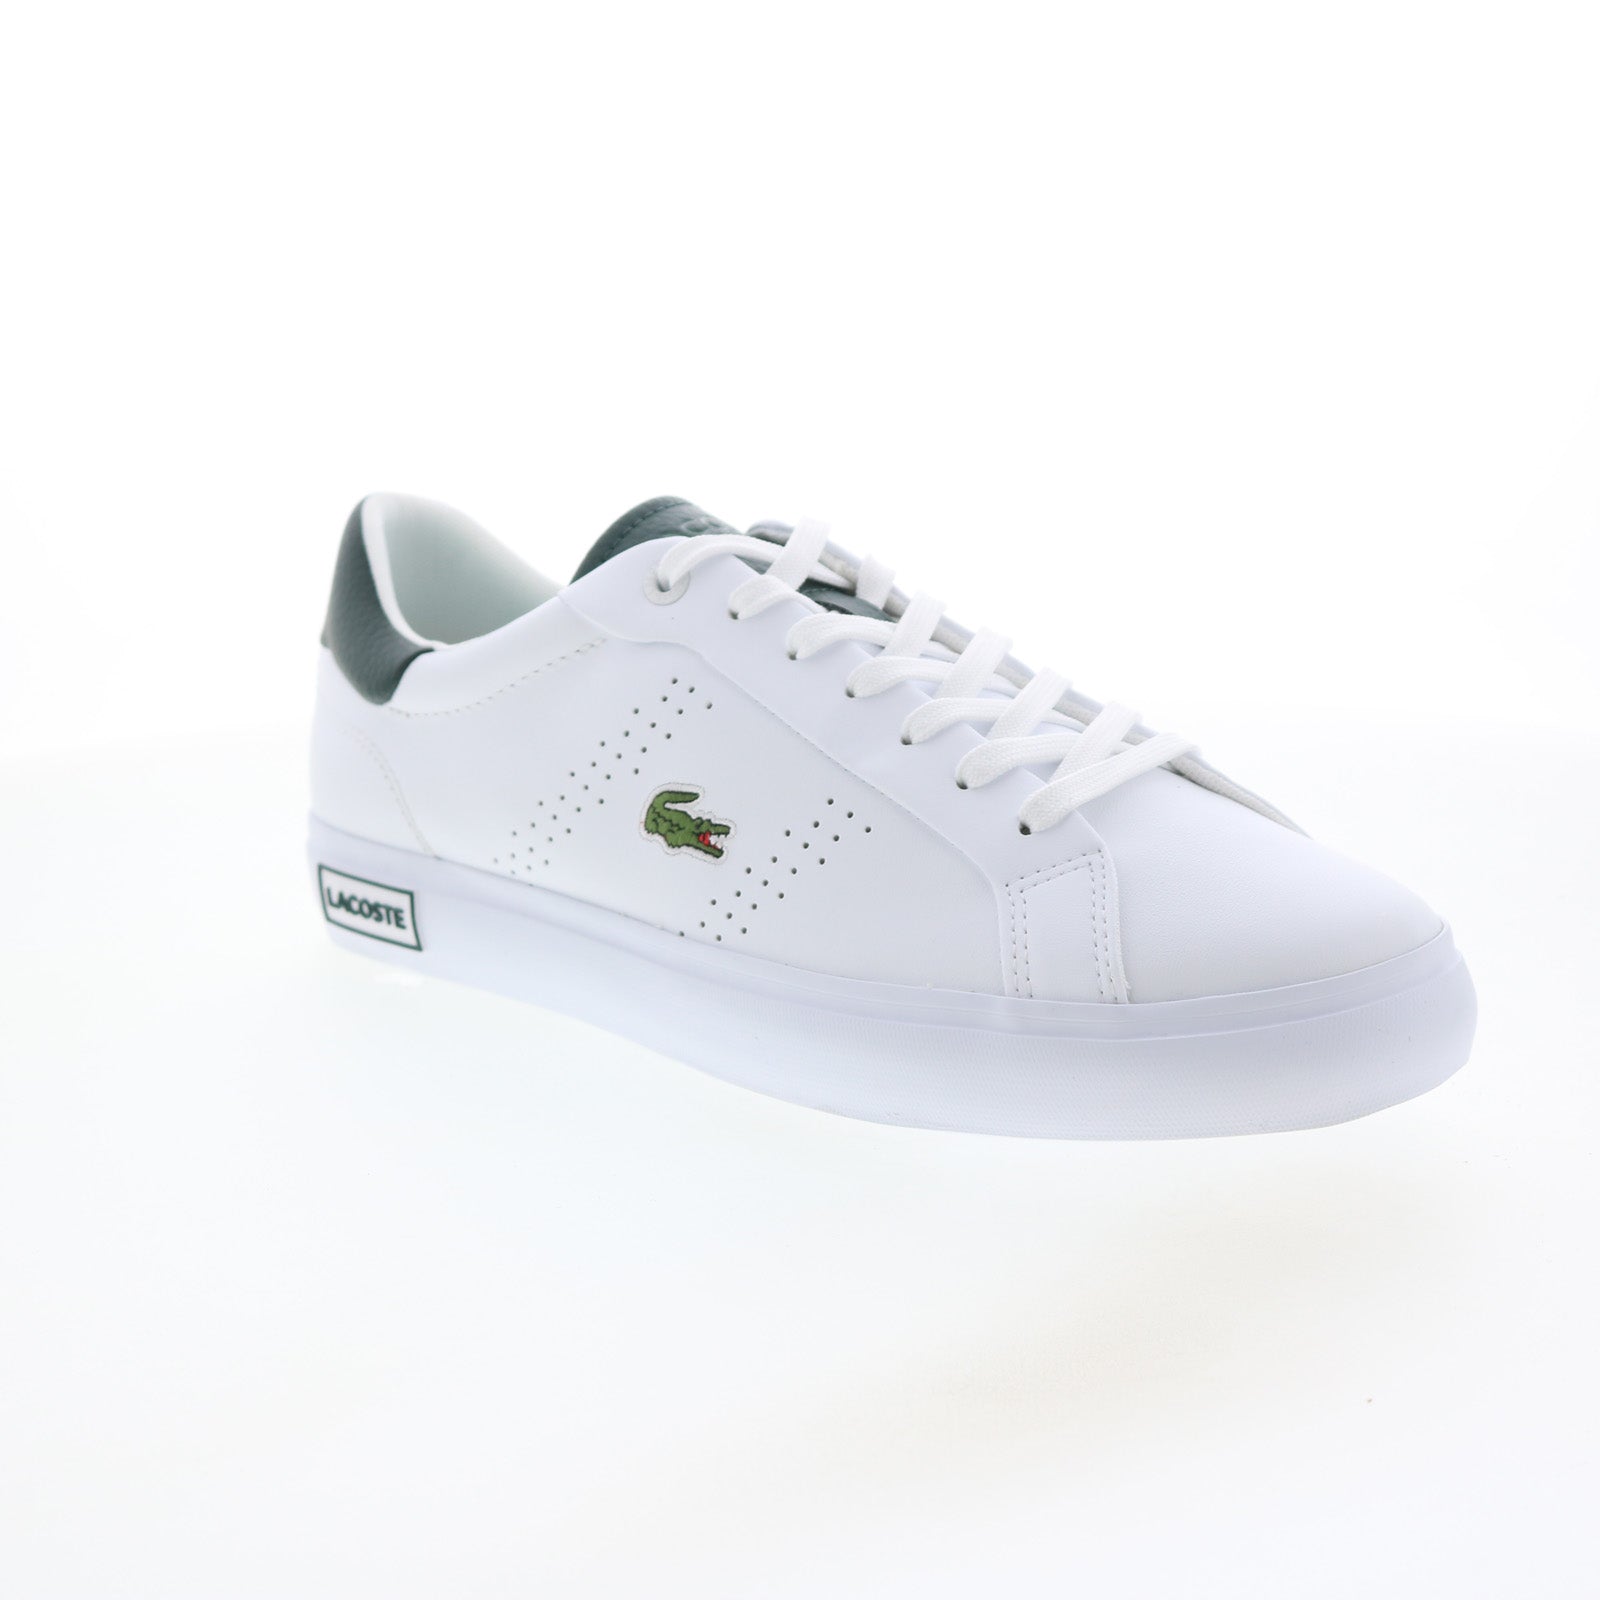 Lacoste Powercourt 2.0 123 Mens White Leather Lifestyle Sneakers Sho - Ruze Shoes